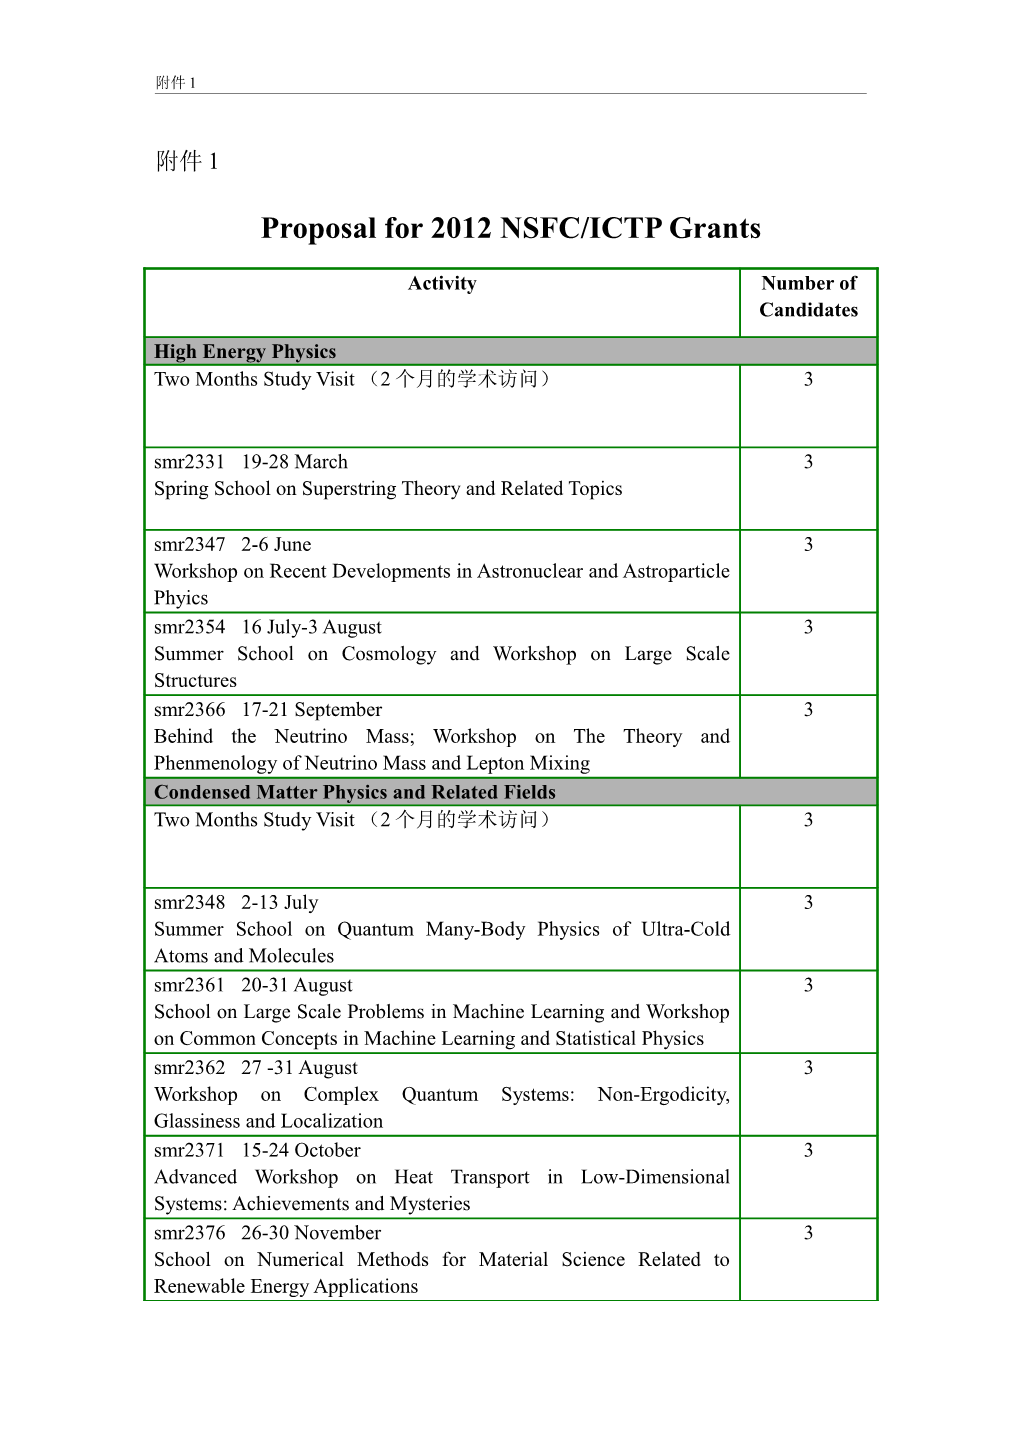 Proposal for 2011 NSFC/ICTP Grants